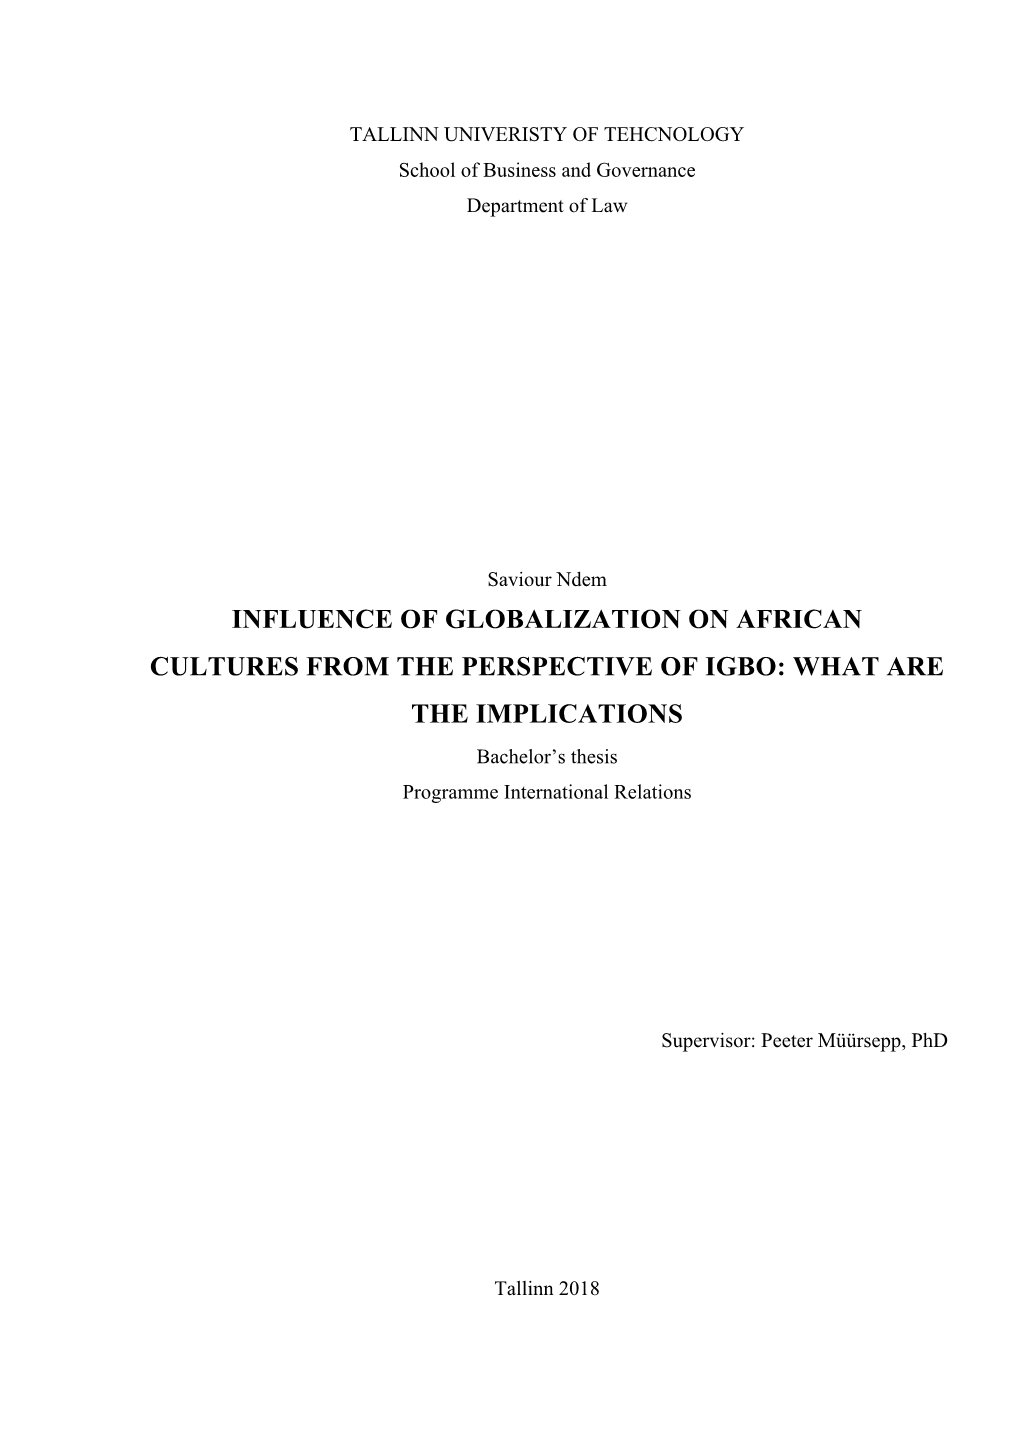 bachelor thesis in international relations